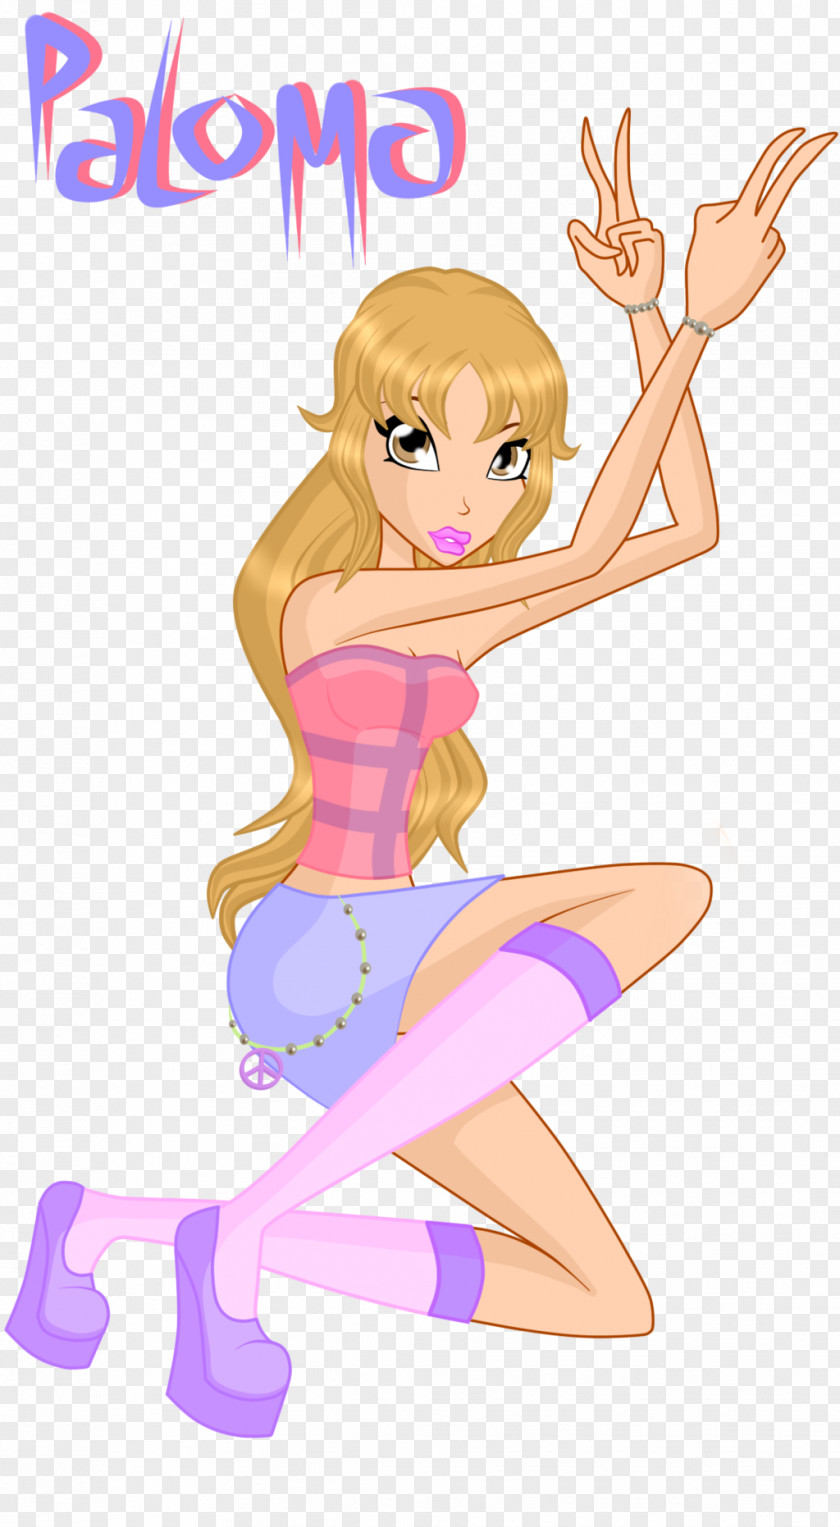 Paloma Believix Hair The Dress Finger PNG